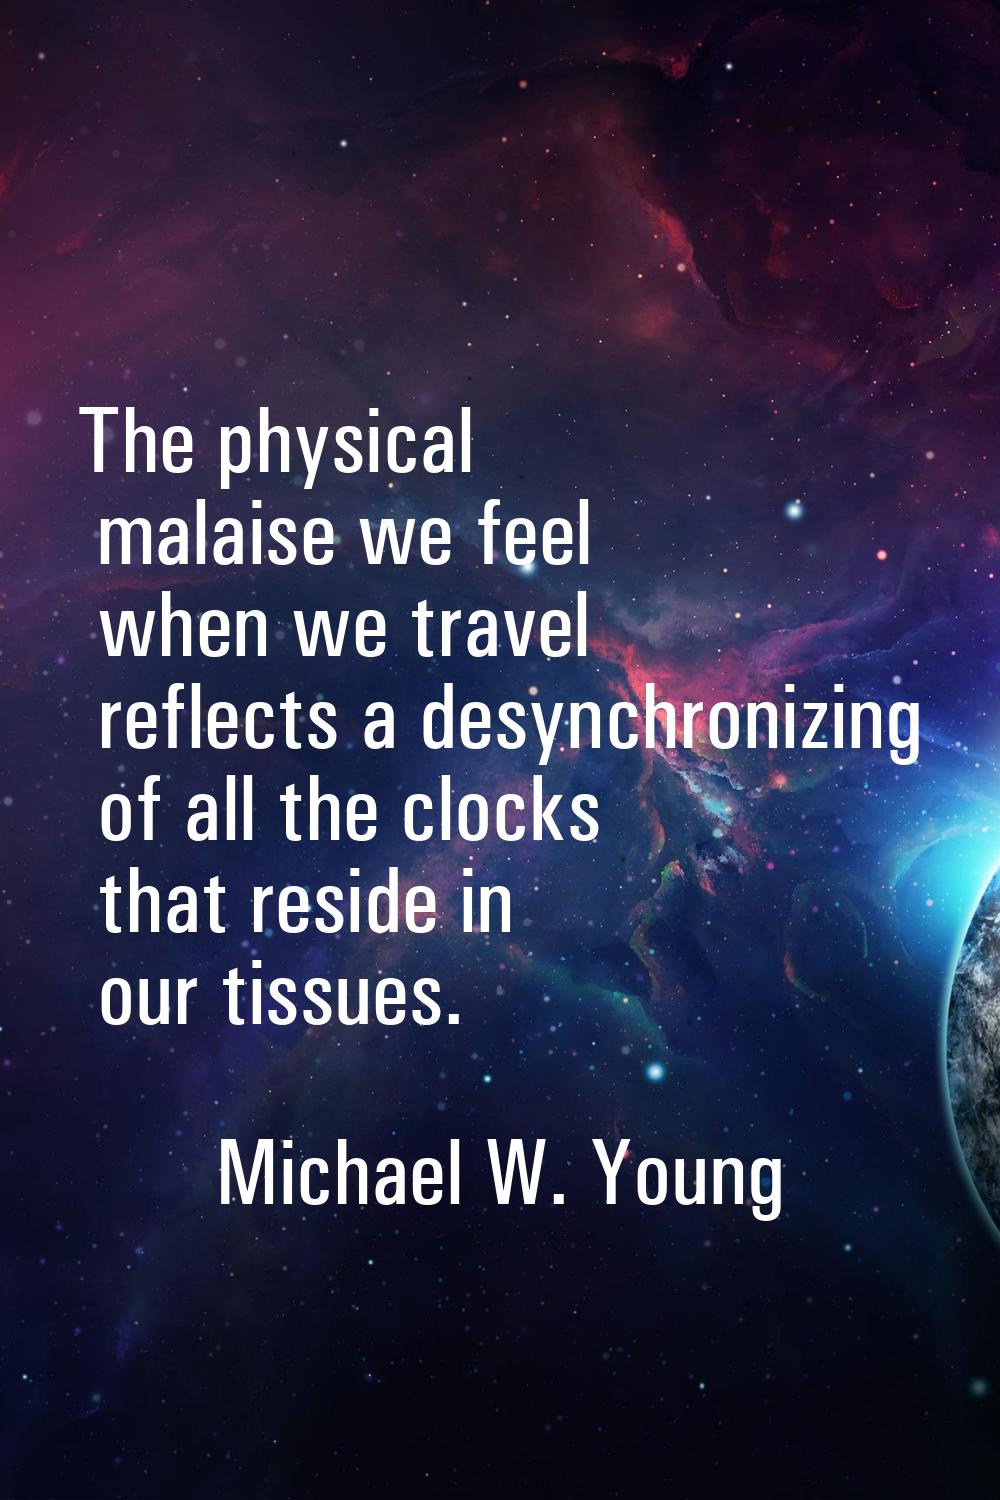 The physical malaise we feel when we travel reflects a desynchronizing of all the clocks that resid